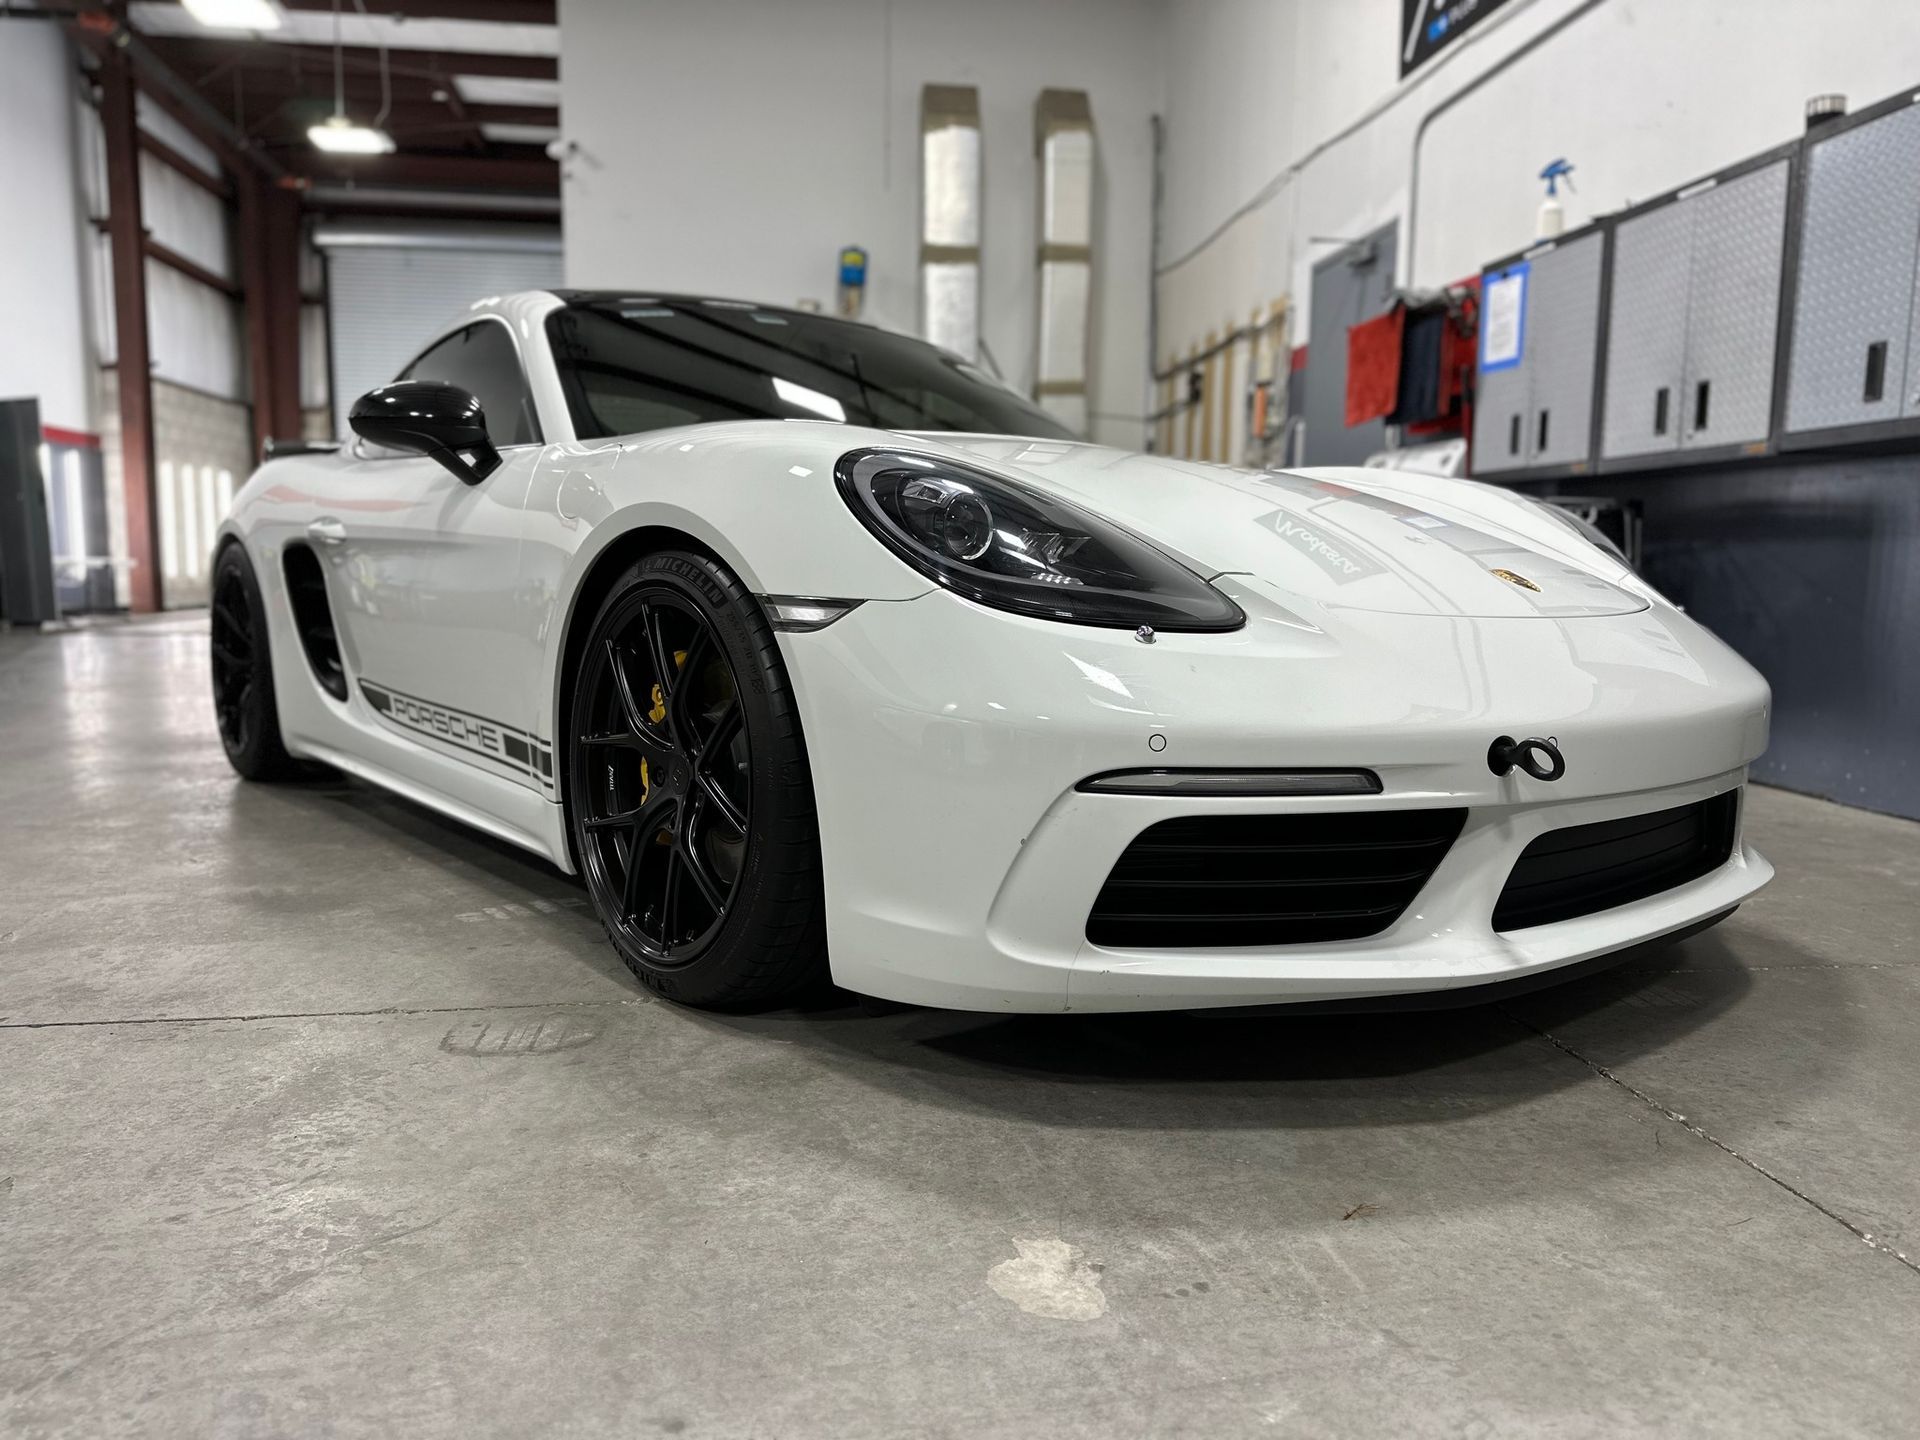 Porsche Cayman S Maintenance Detail with Aenso front end view Orlando, Florida